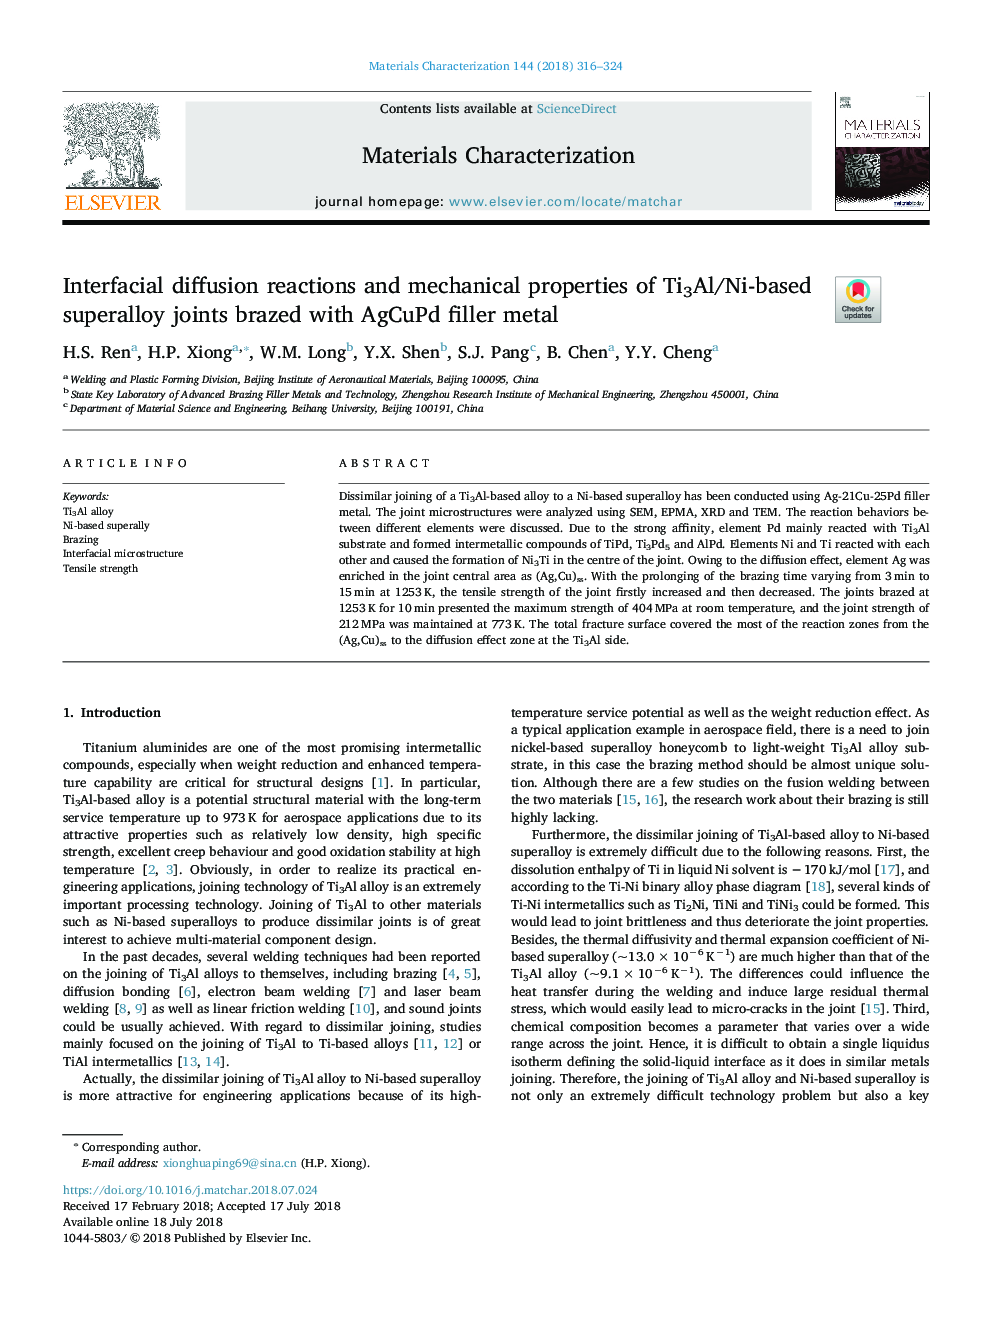 Interfacial diffusion reactions and mechanical properties of Ti3Al/Ni-based superalloy joints brazed with AgCuPd filler metal